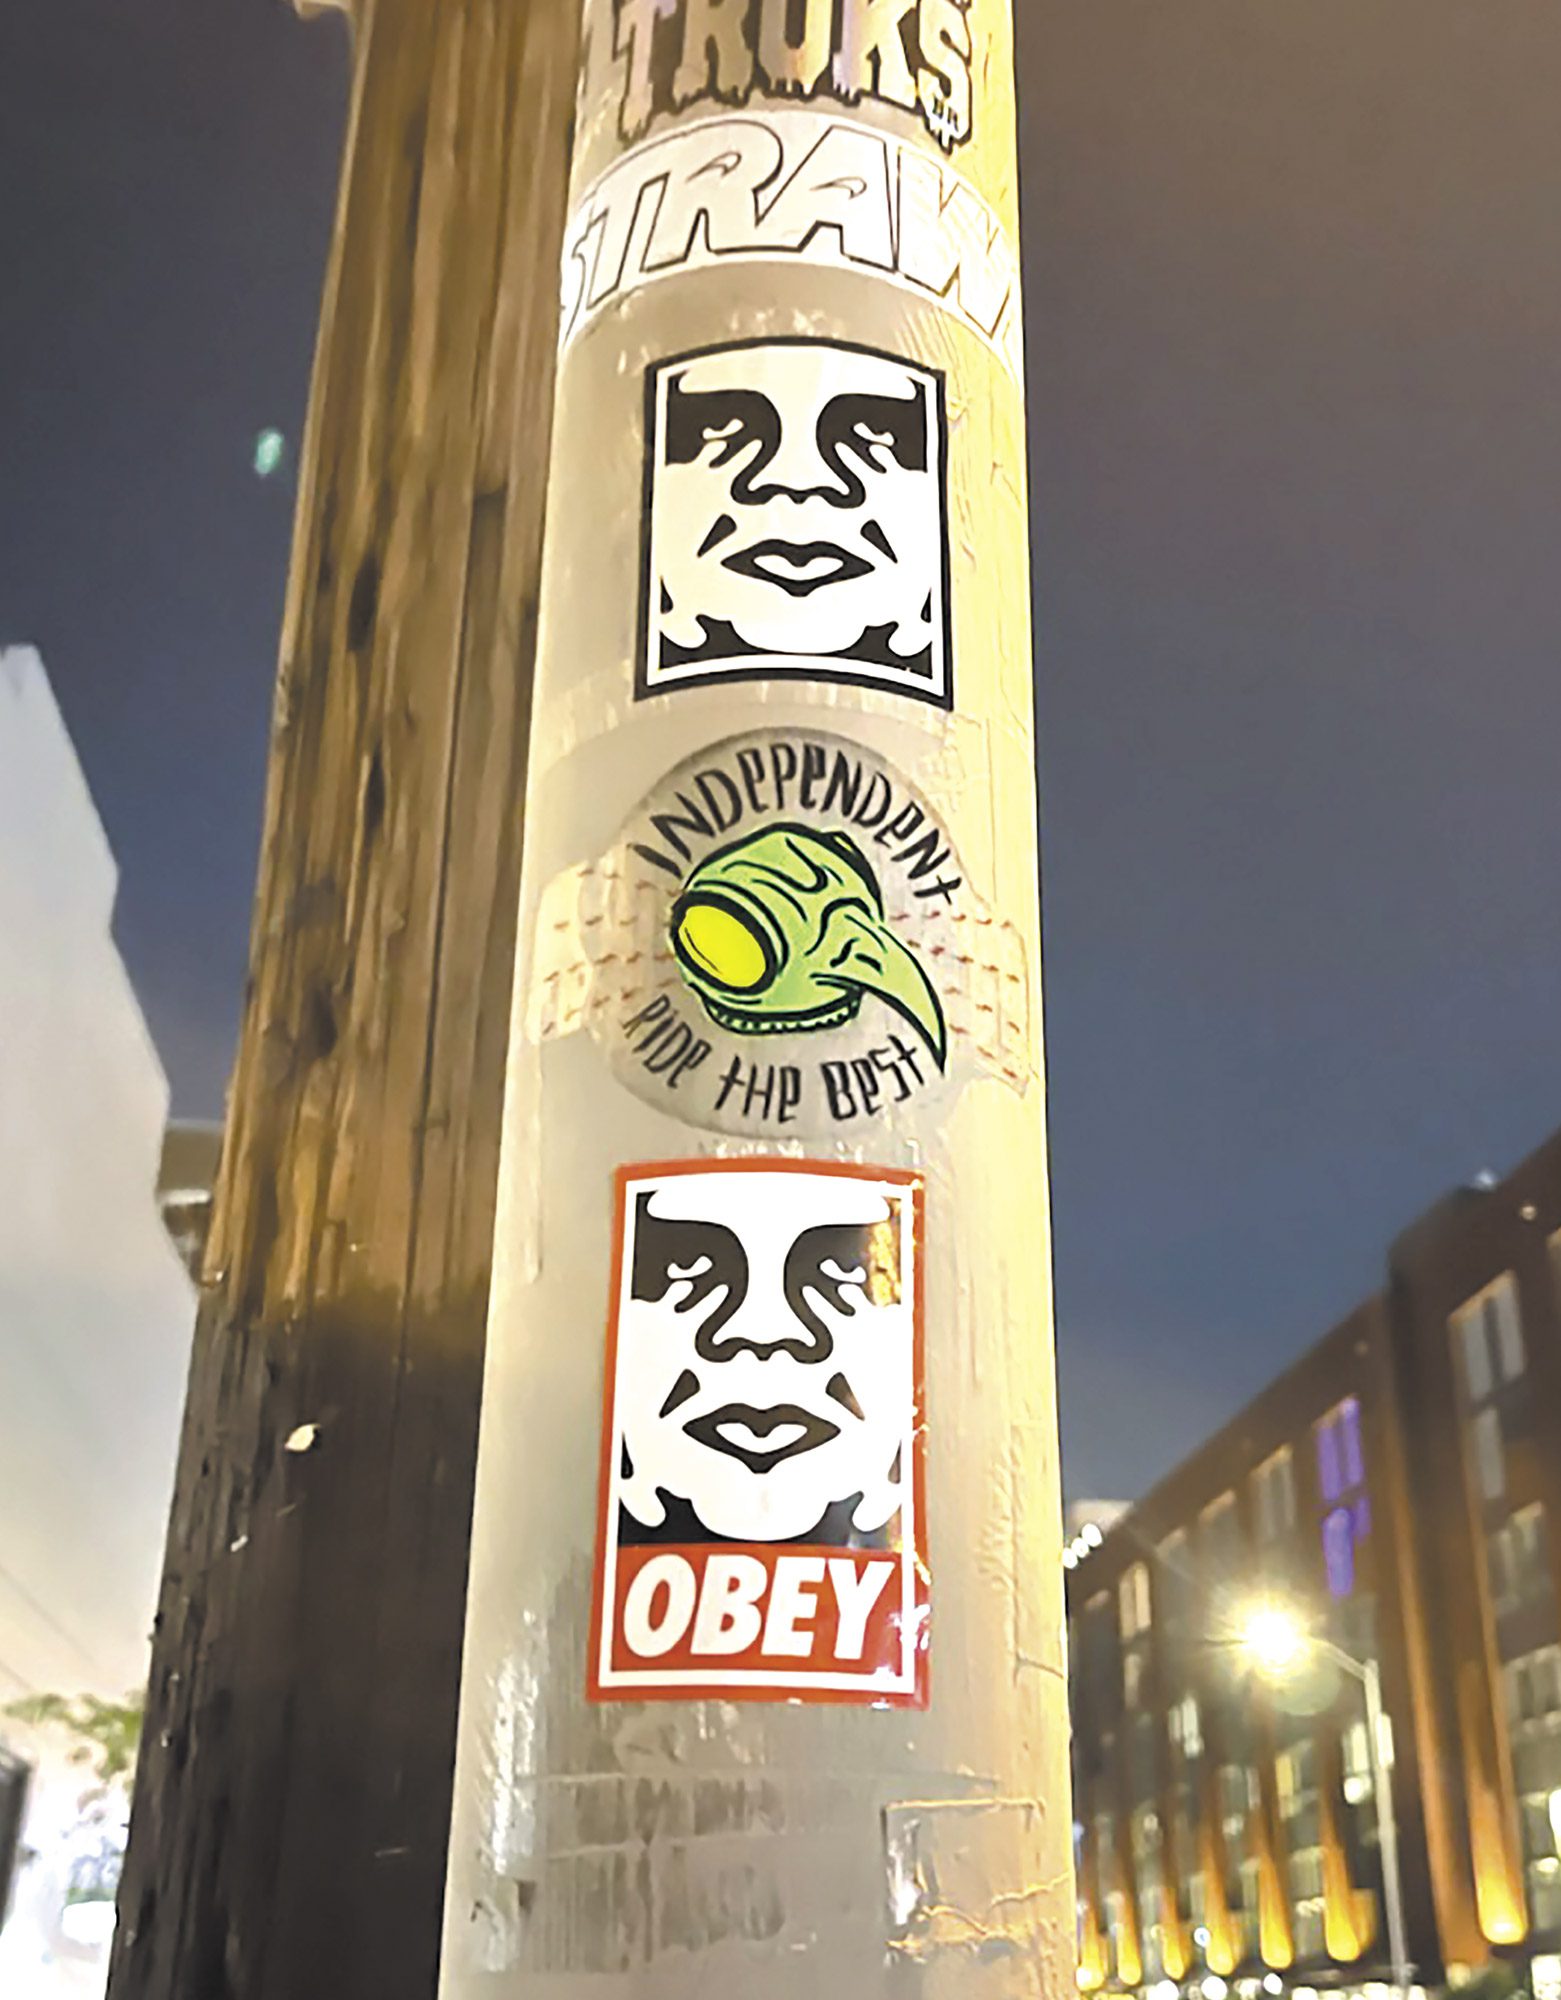 Tony Hawk x Mark Mothersbaugh collaboration for independent trucks between shepard fairey's obey giant, photo courtesy of mark mothersbaugh